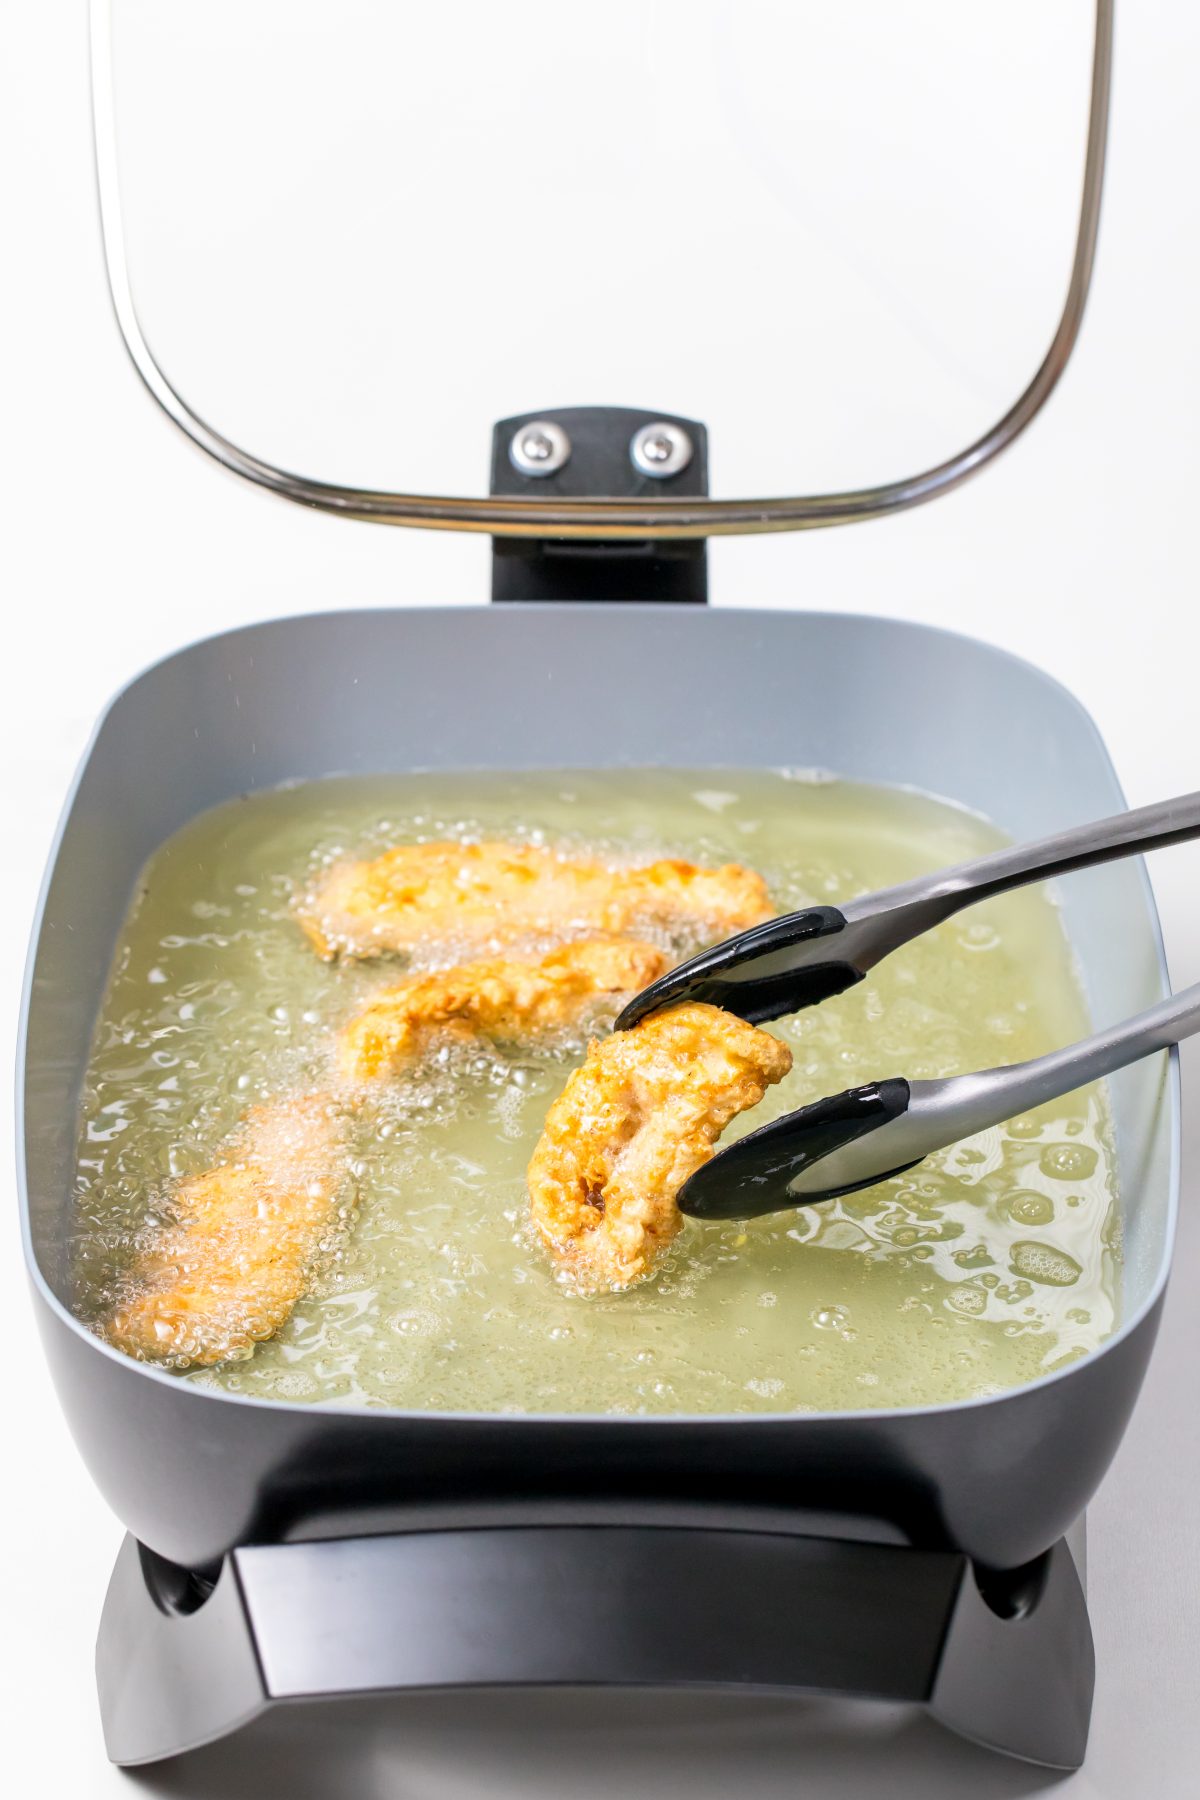 Deep-fry chicken until cooked through